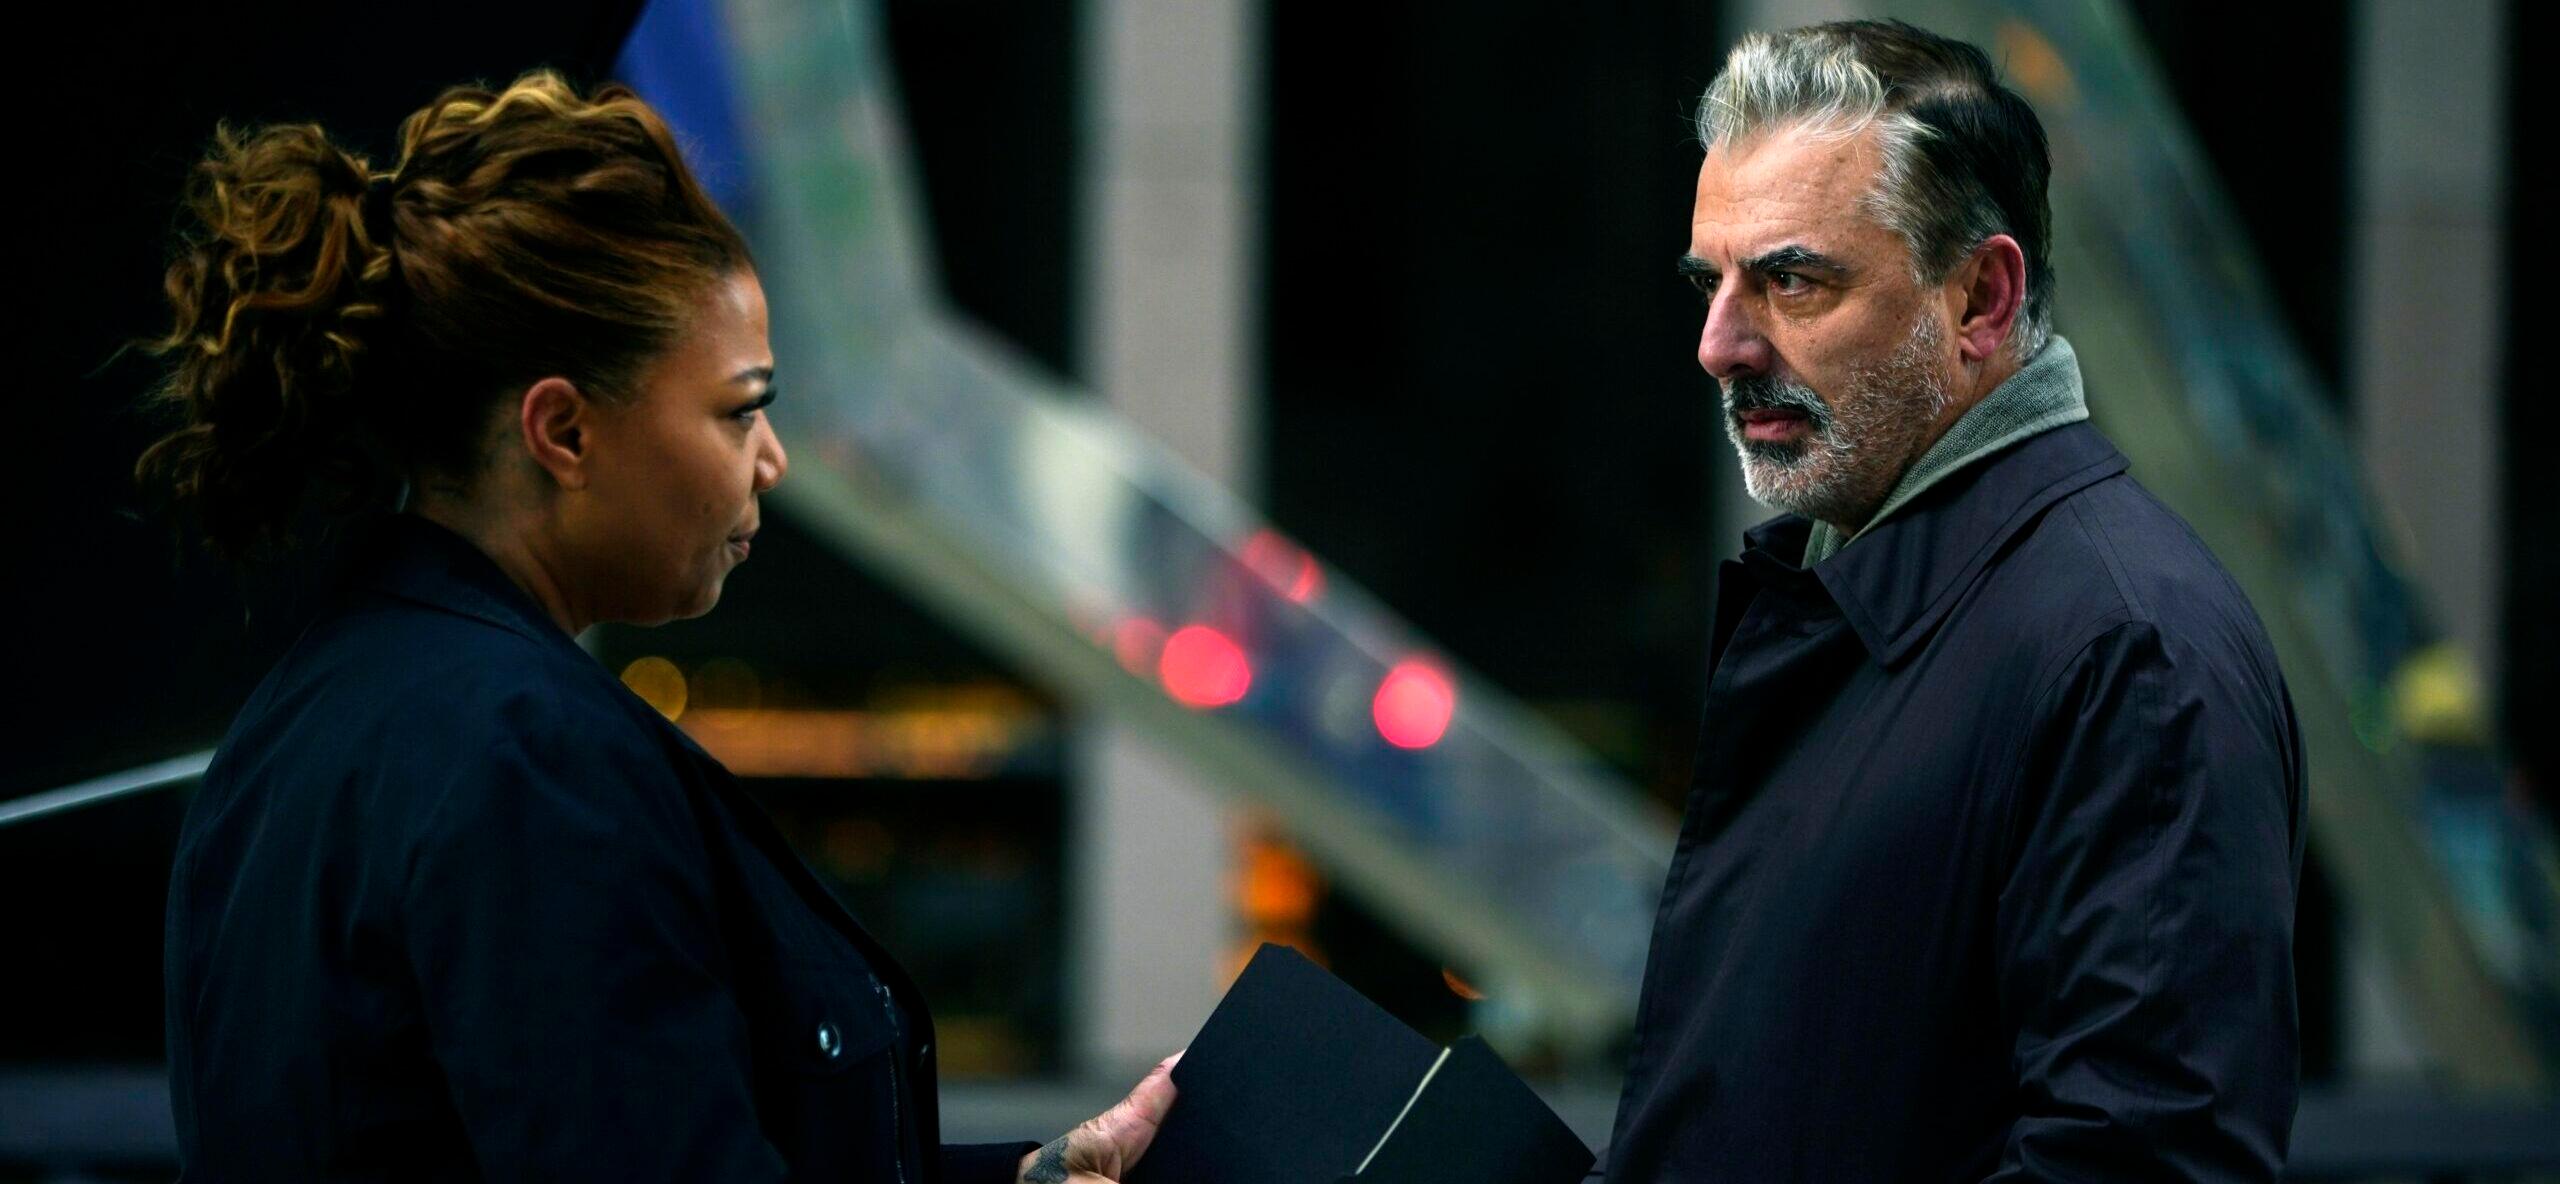 Chris Noth DROPPED From ‘The Equalizer’ Amid Sexual Assault Allegations